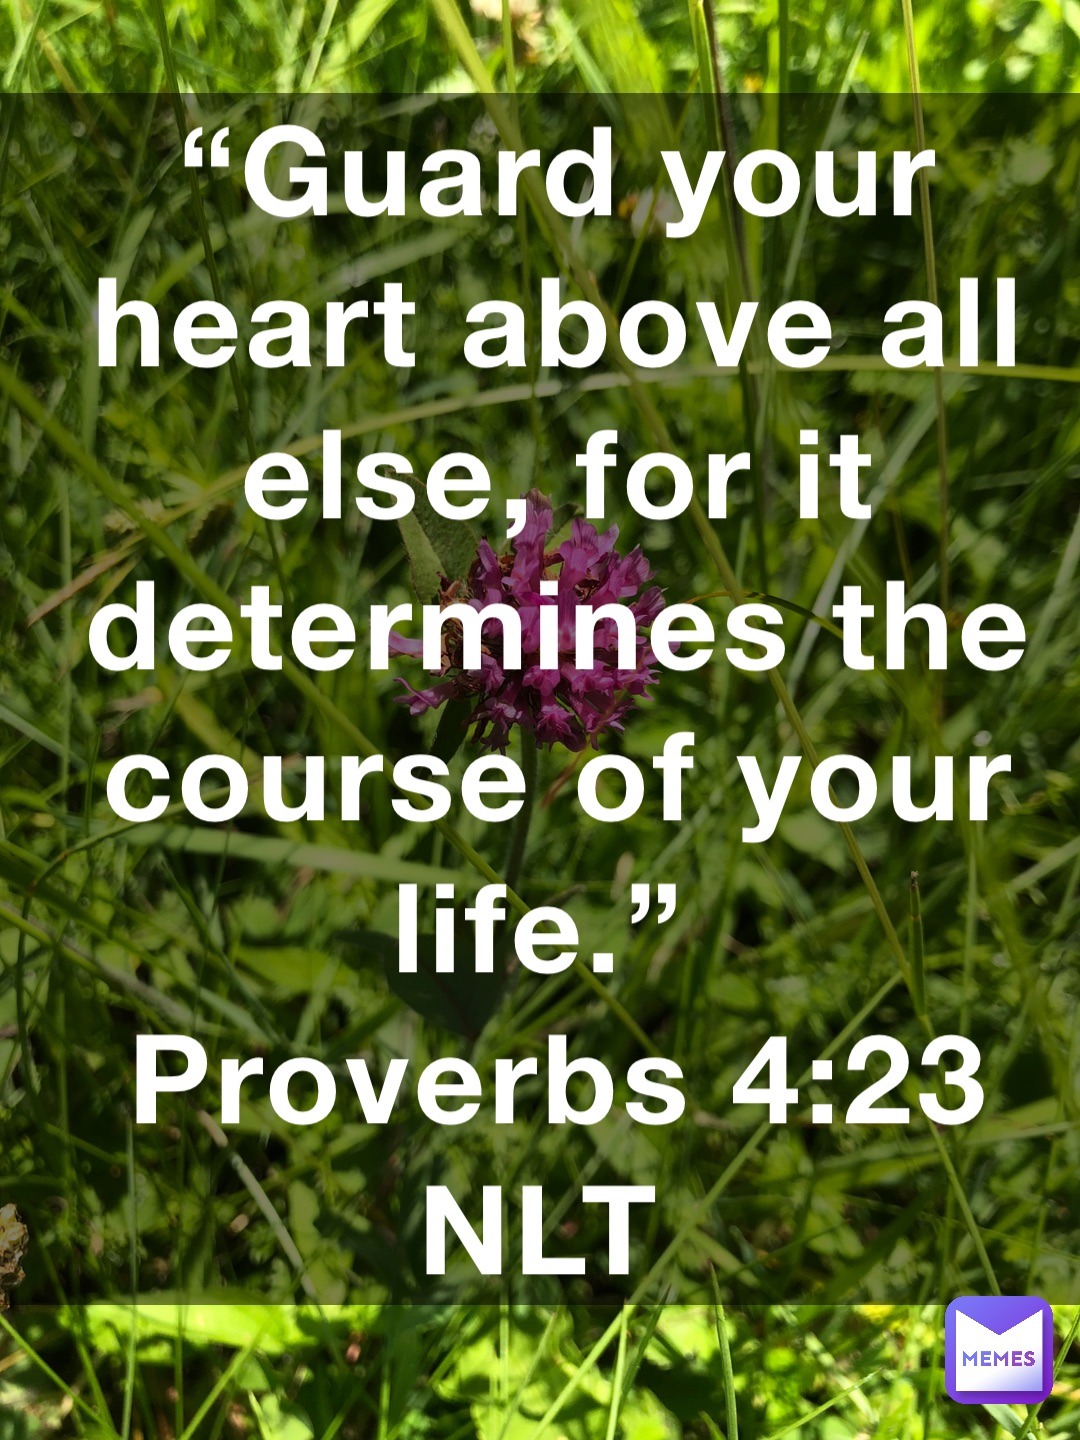 “Guard your heart above all else, for it determines the course of your life.”
‭‭Proverbs‬ ‭4:23‬ ‭NLT